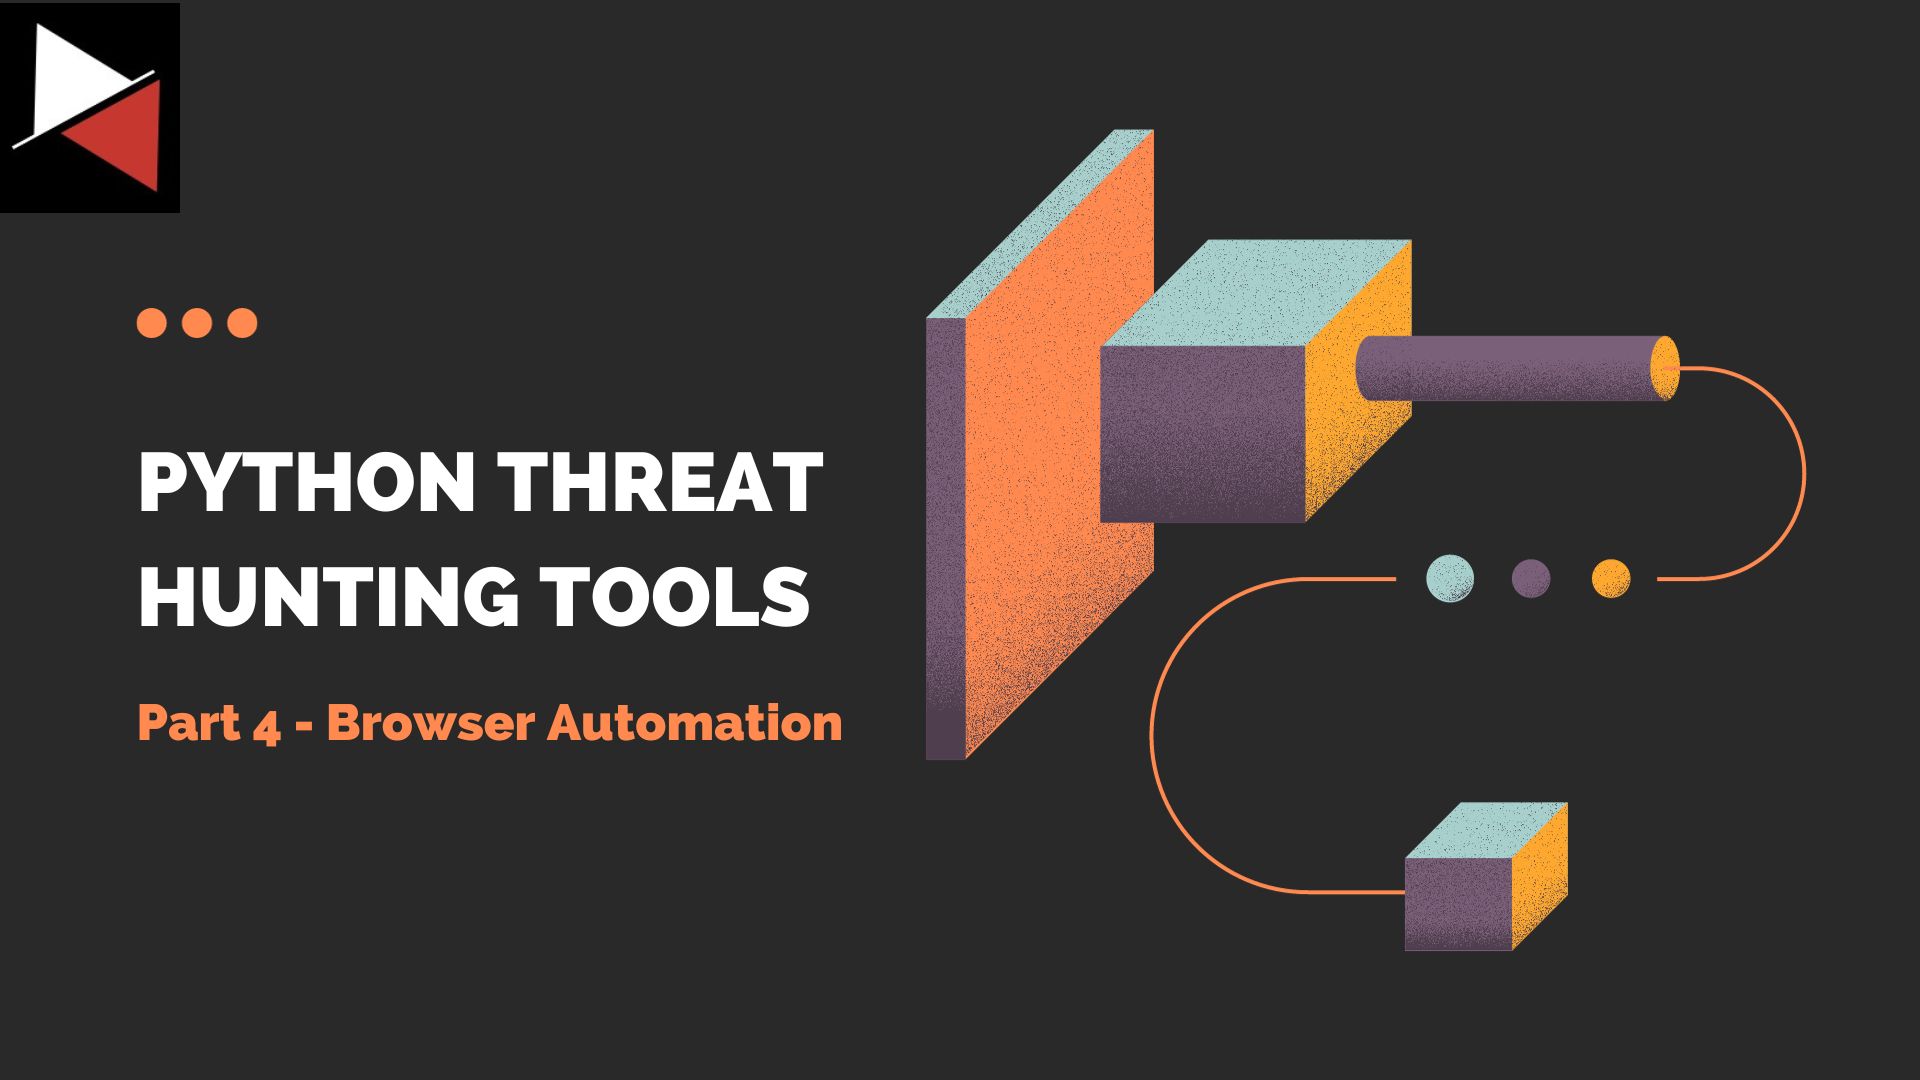 Python Threat Hunting Tools - Browser Automation